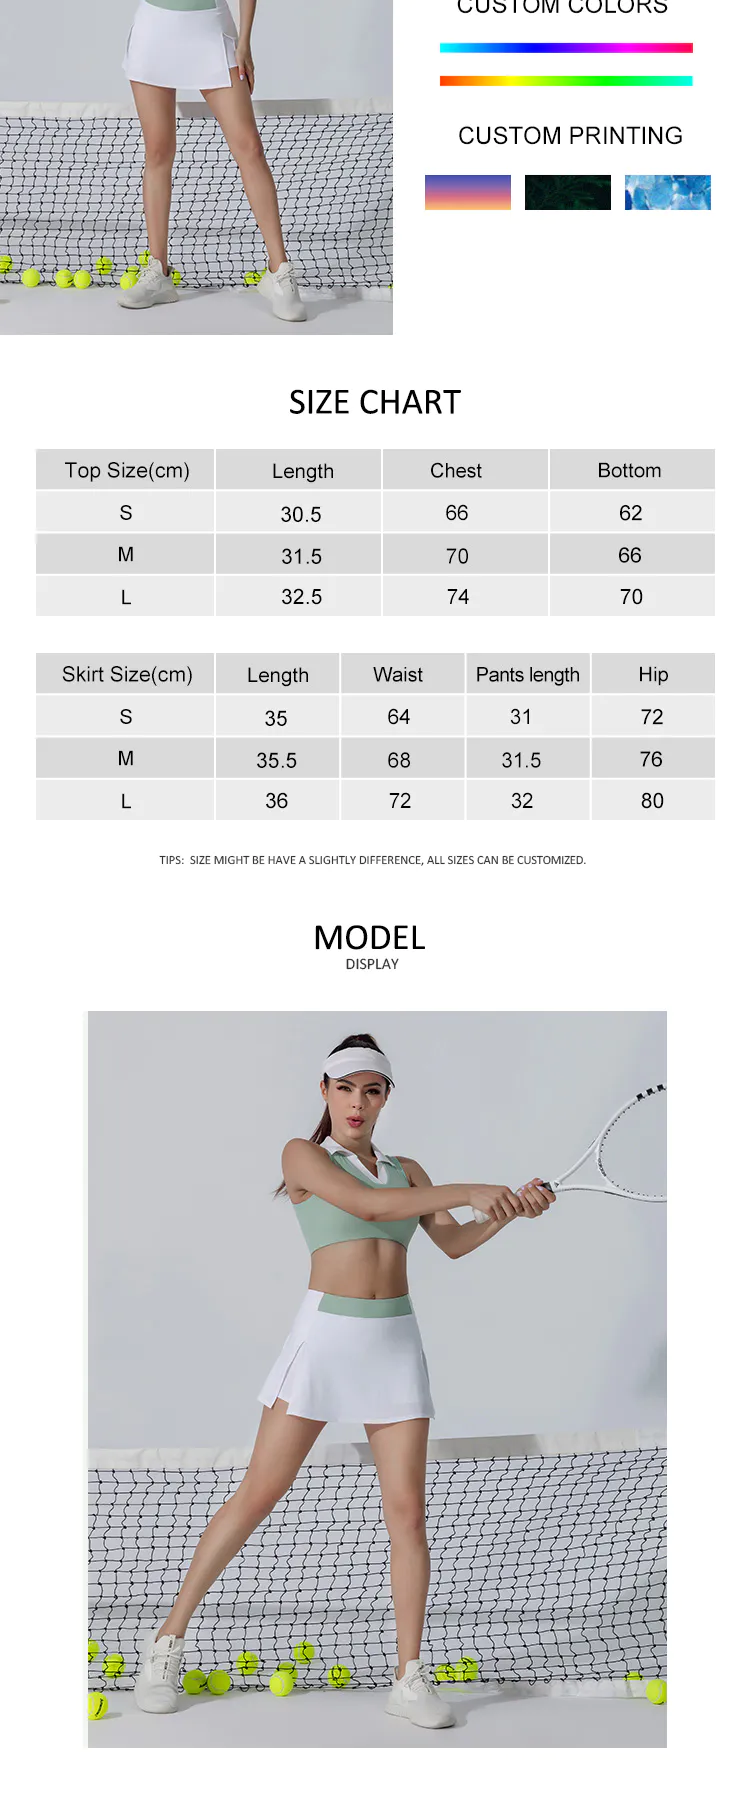 INGOR custom woman tennis clothes solutions for sport